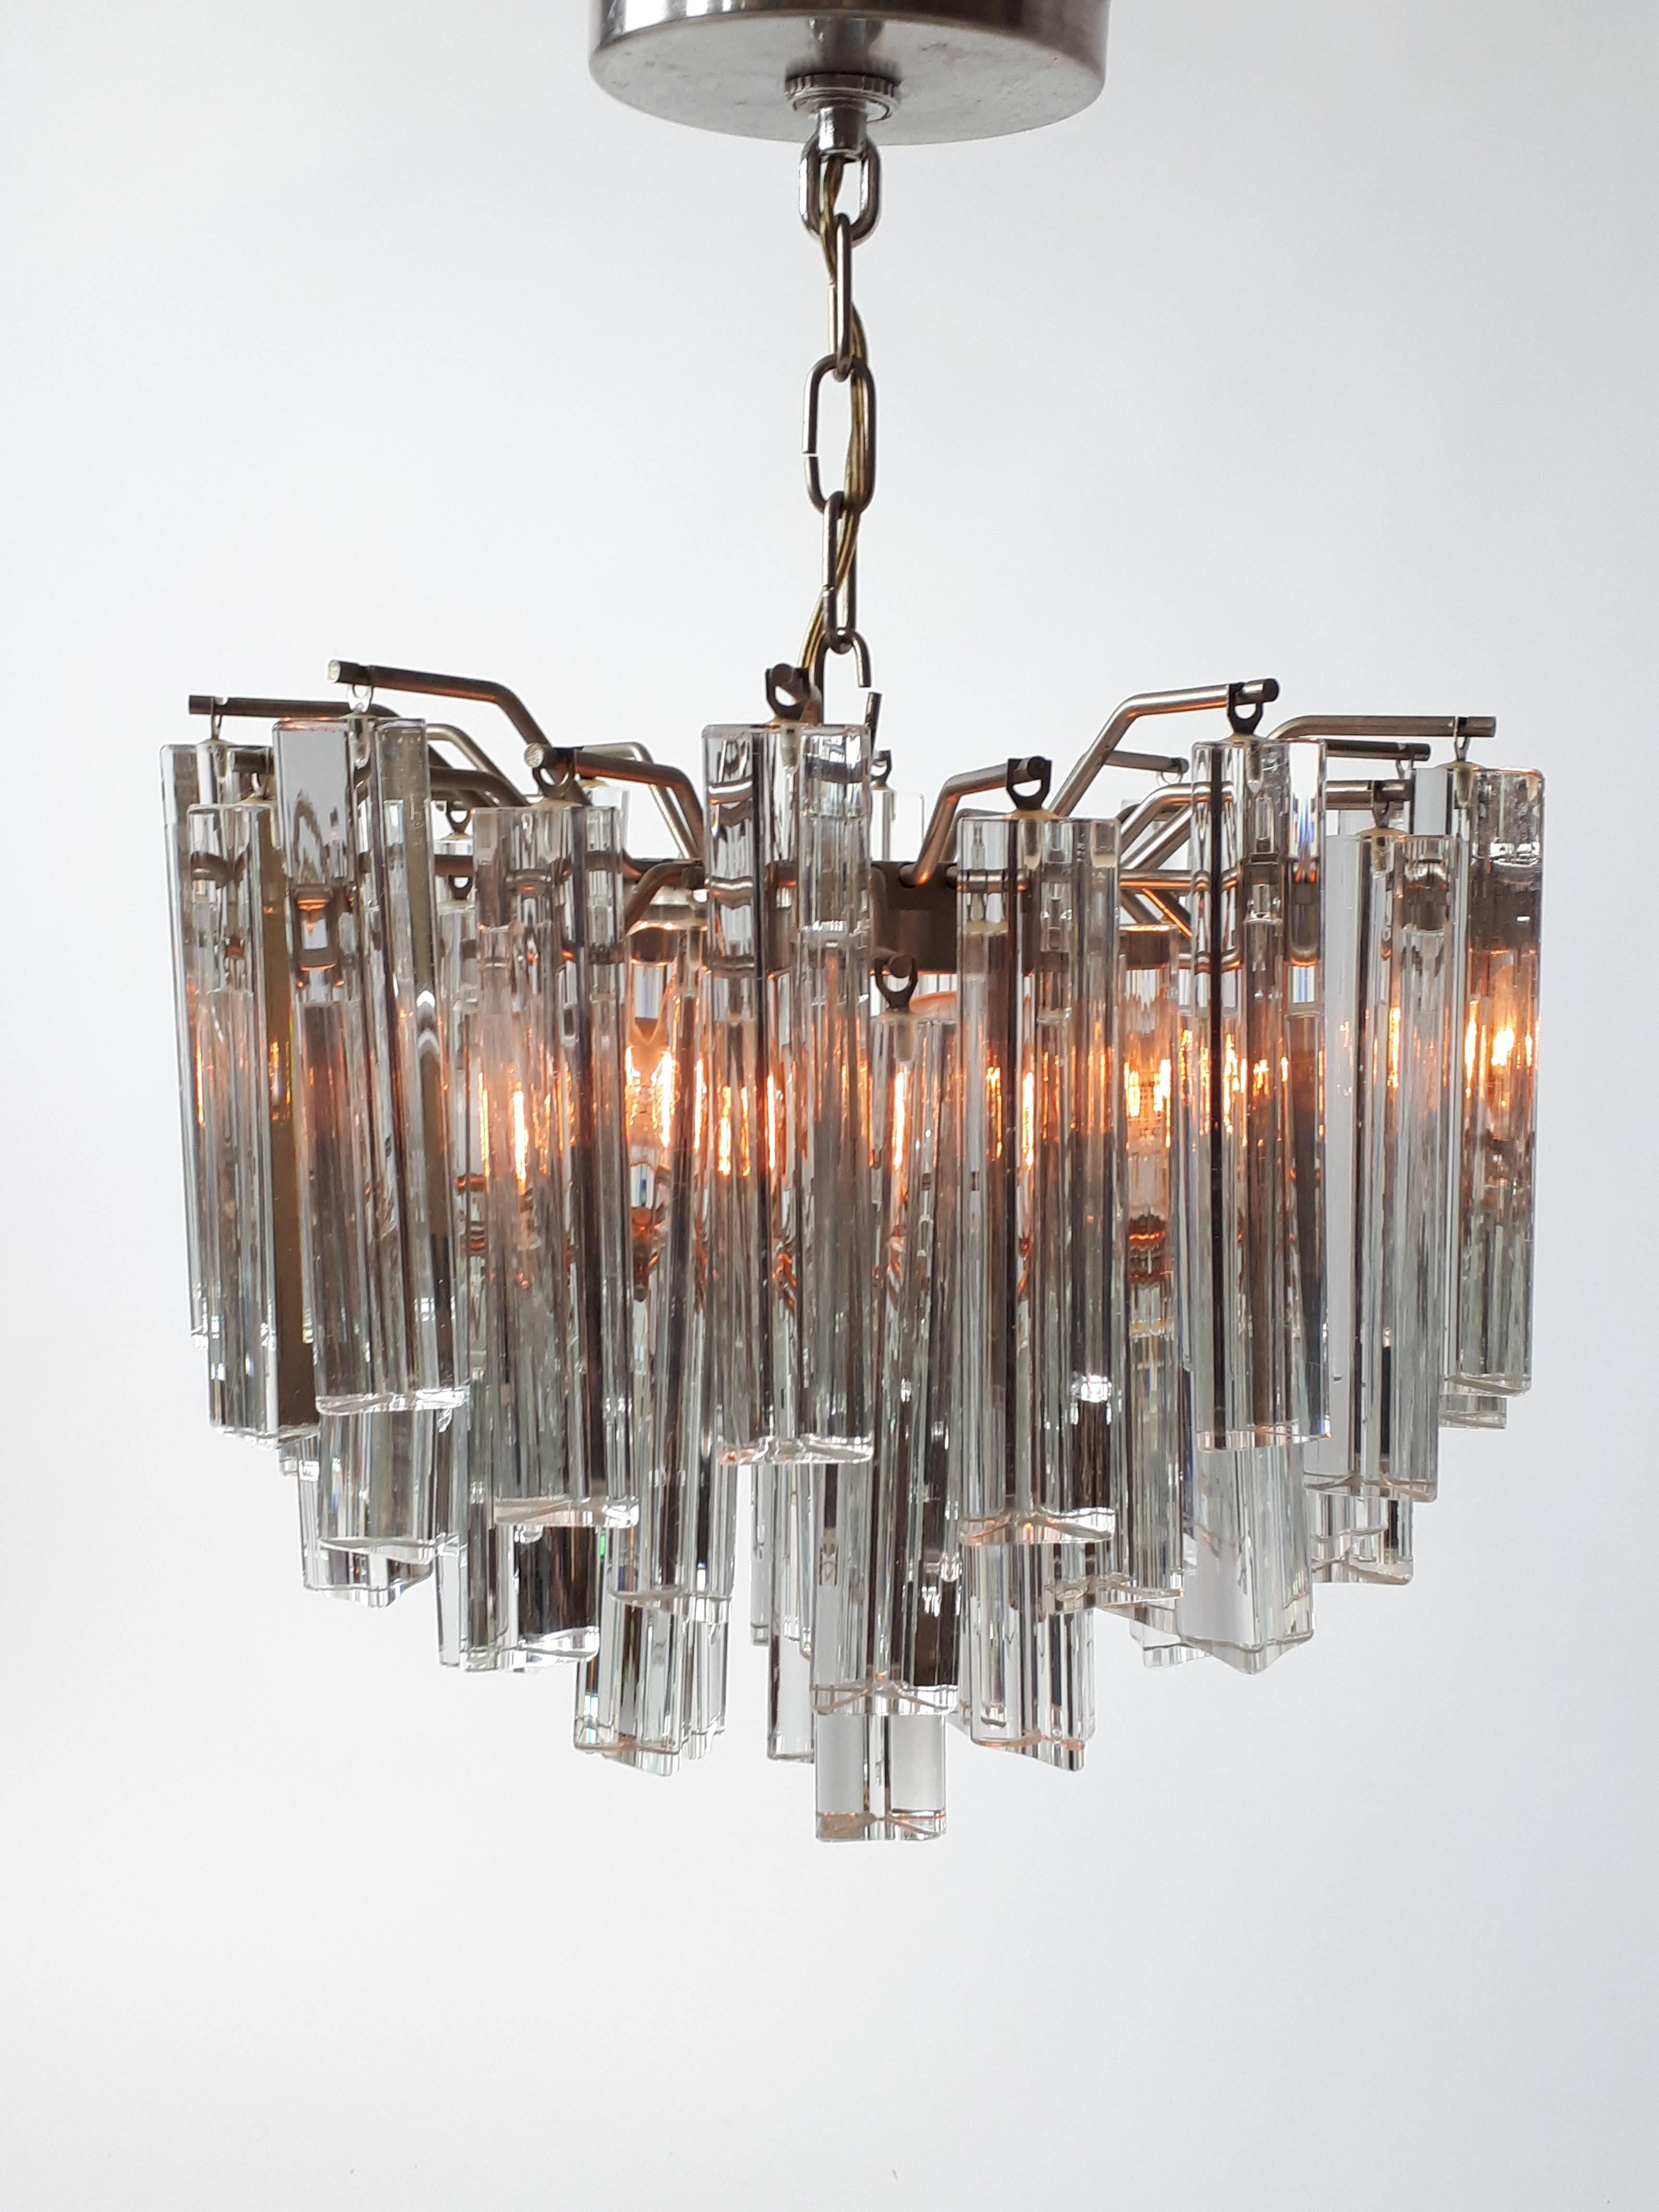 Steel Camer, Venini Solid Glass Chandelier or Pendant, 1960s, Italy For Sale